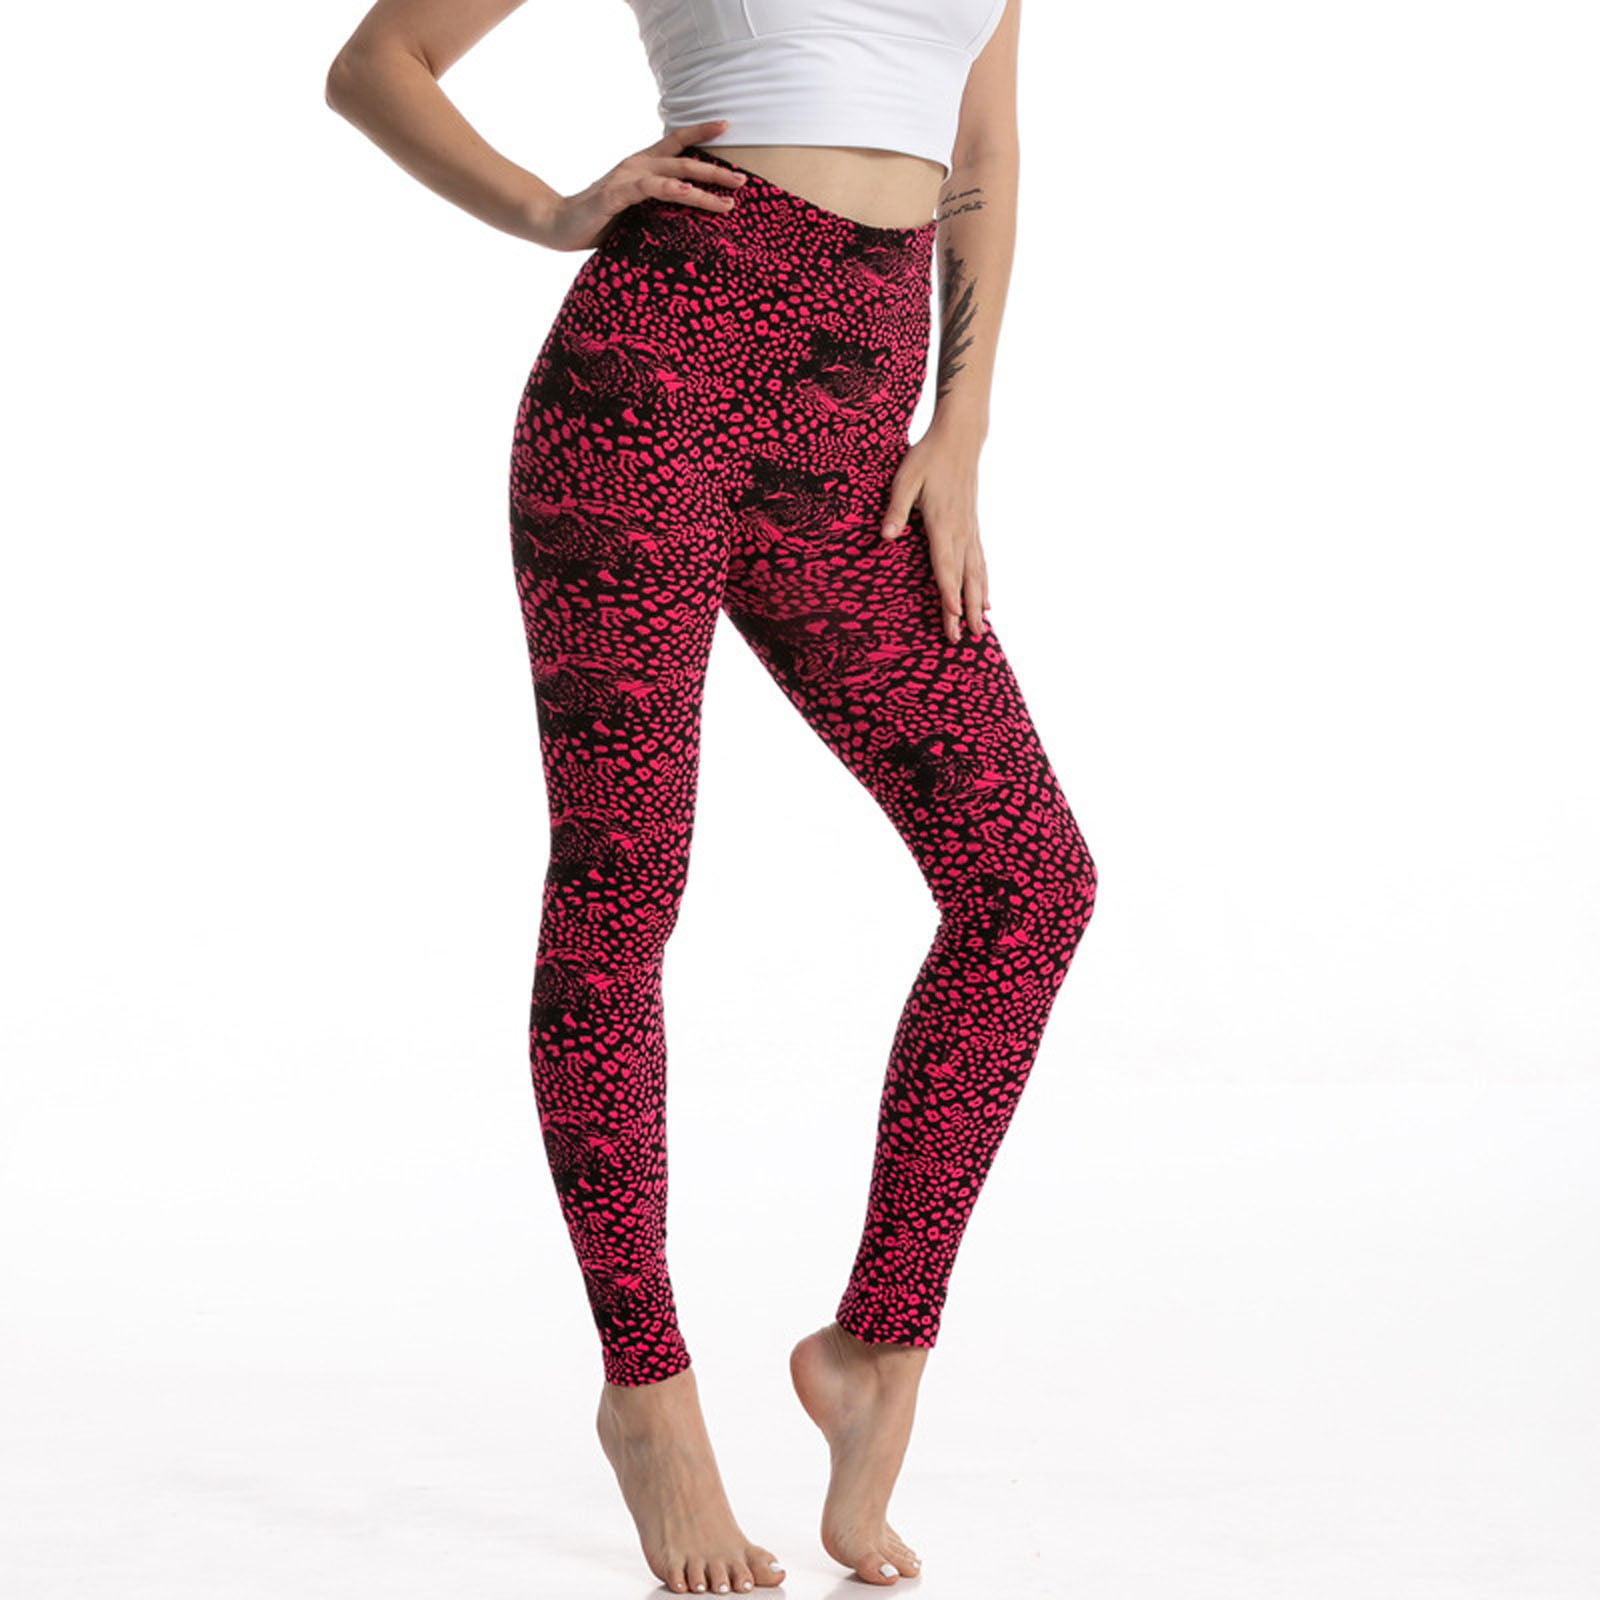 NEW LADIES UK SIZES 8-14 WHITE OR RED STRETCH JERSEY FULL LENGTH LEGGINGS *SALE* 